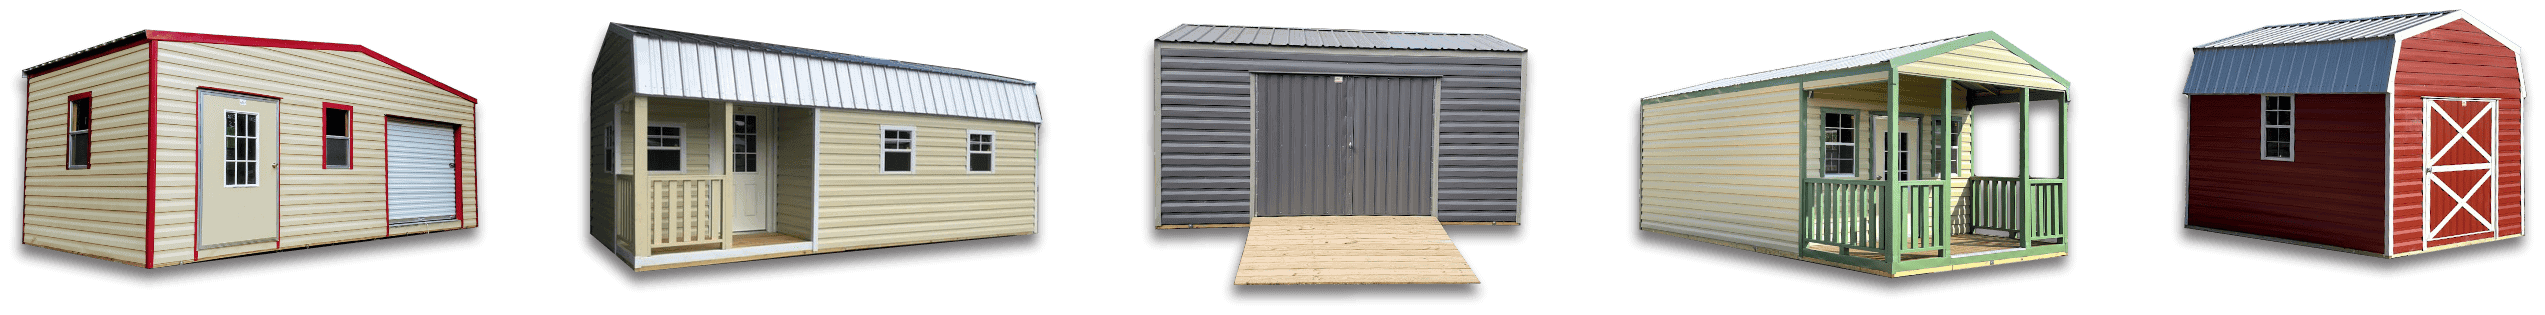 Explore our durable and affordable 8x14 sheds for sale, including portable buildings and storage sheds. Our shed dealer offers a variety of outdoor storage building options to fit your needs. Discover the perfect 8x14 shed style for your property at Robin Sheds.